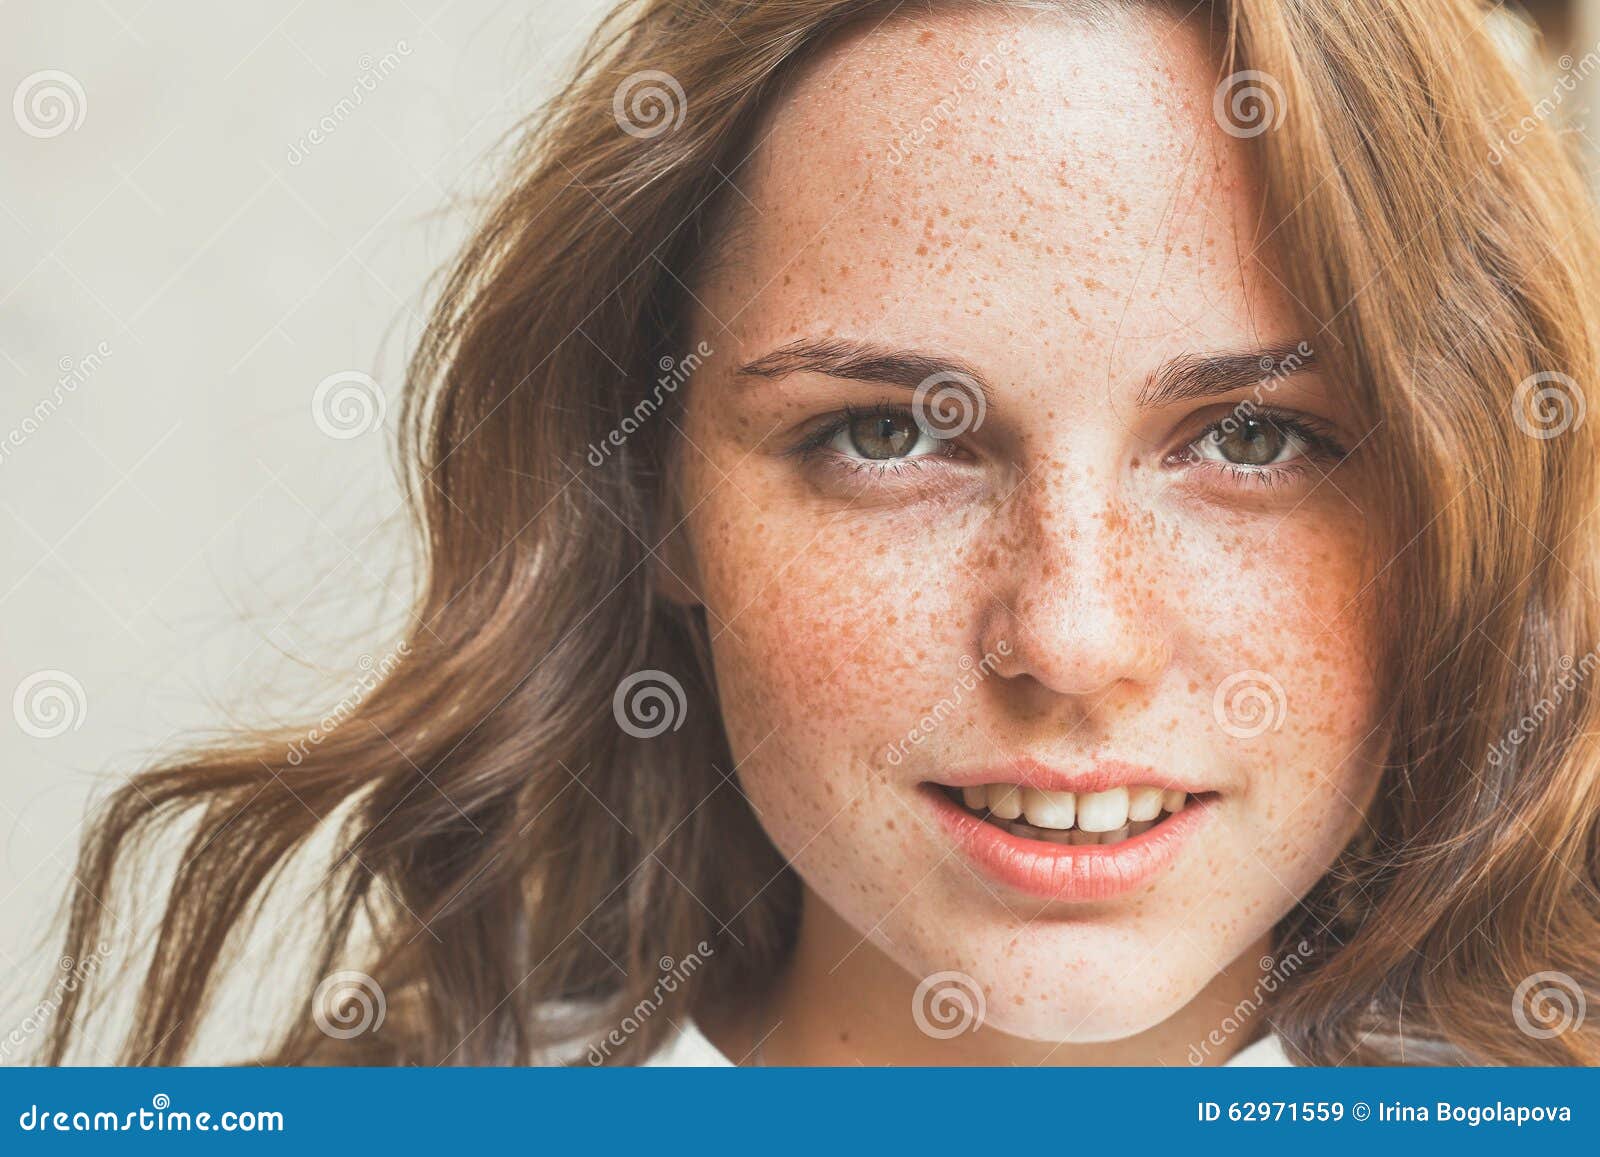 outdoor beauty. portrait of smiling young and happy woman with freckles.